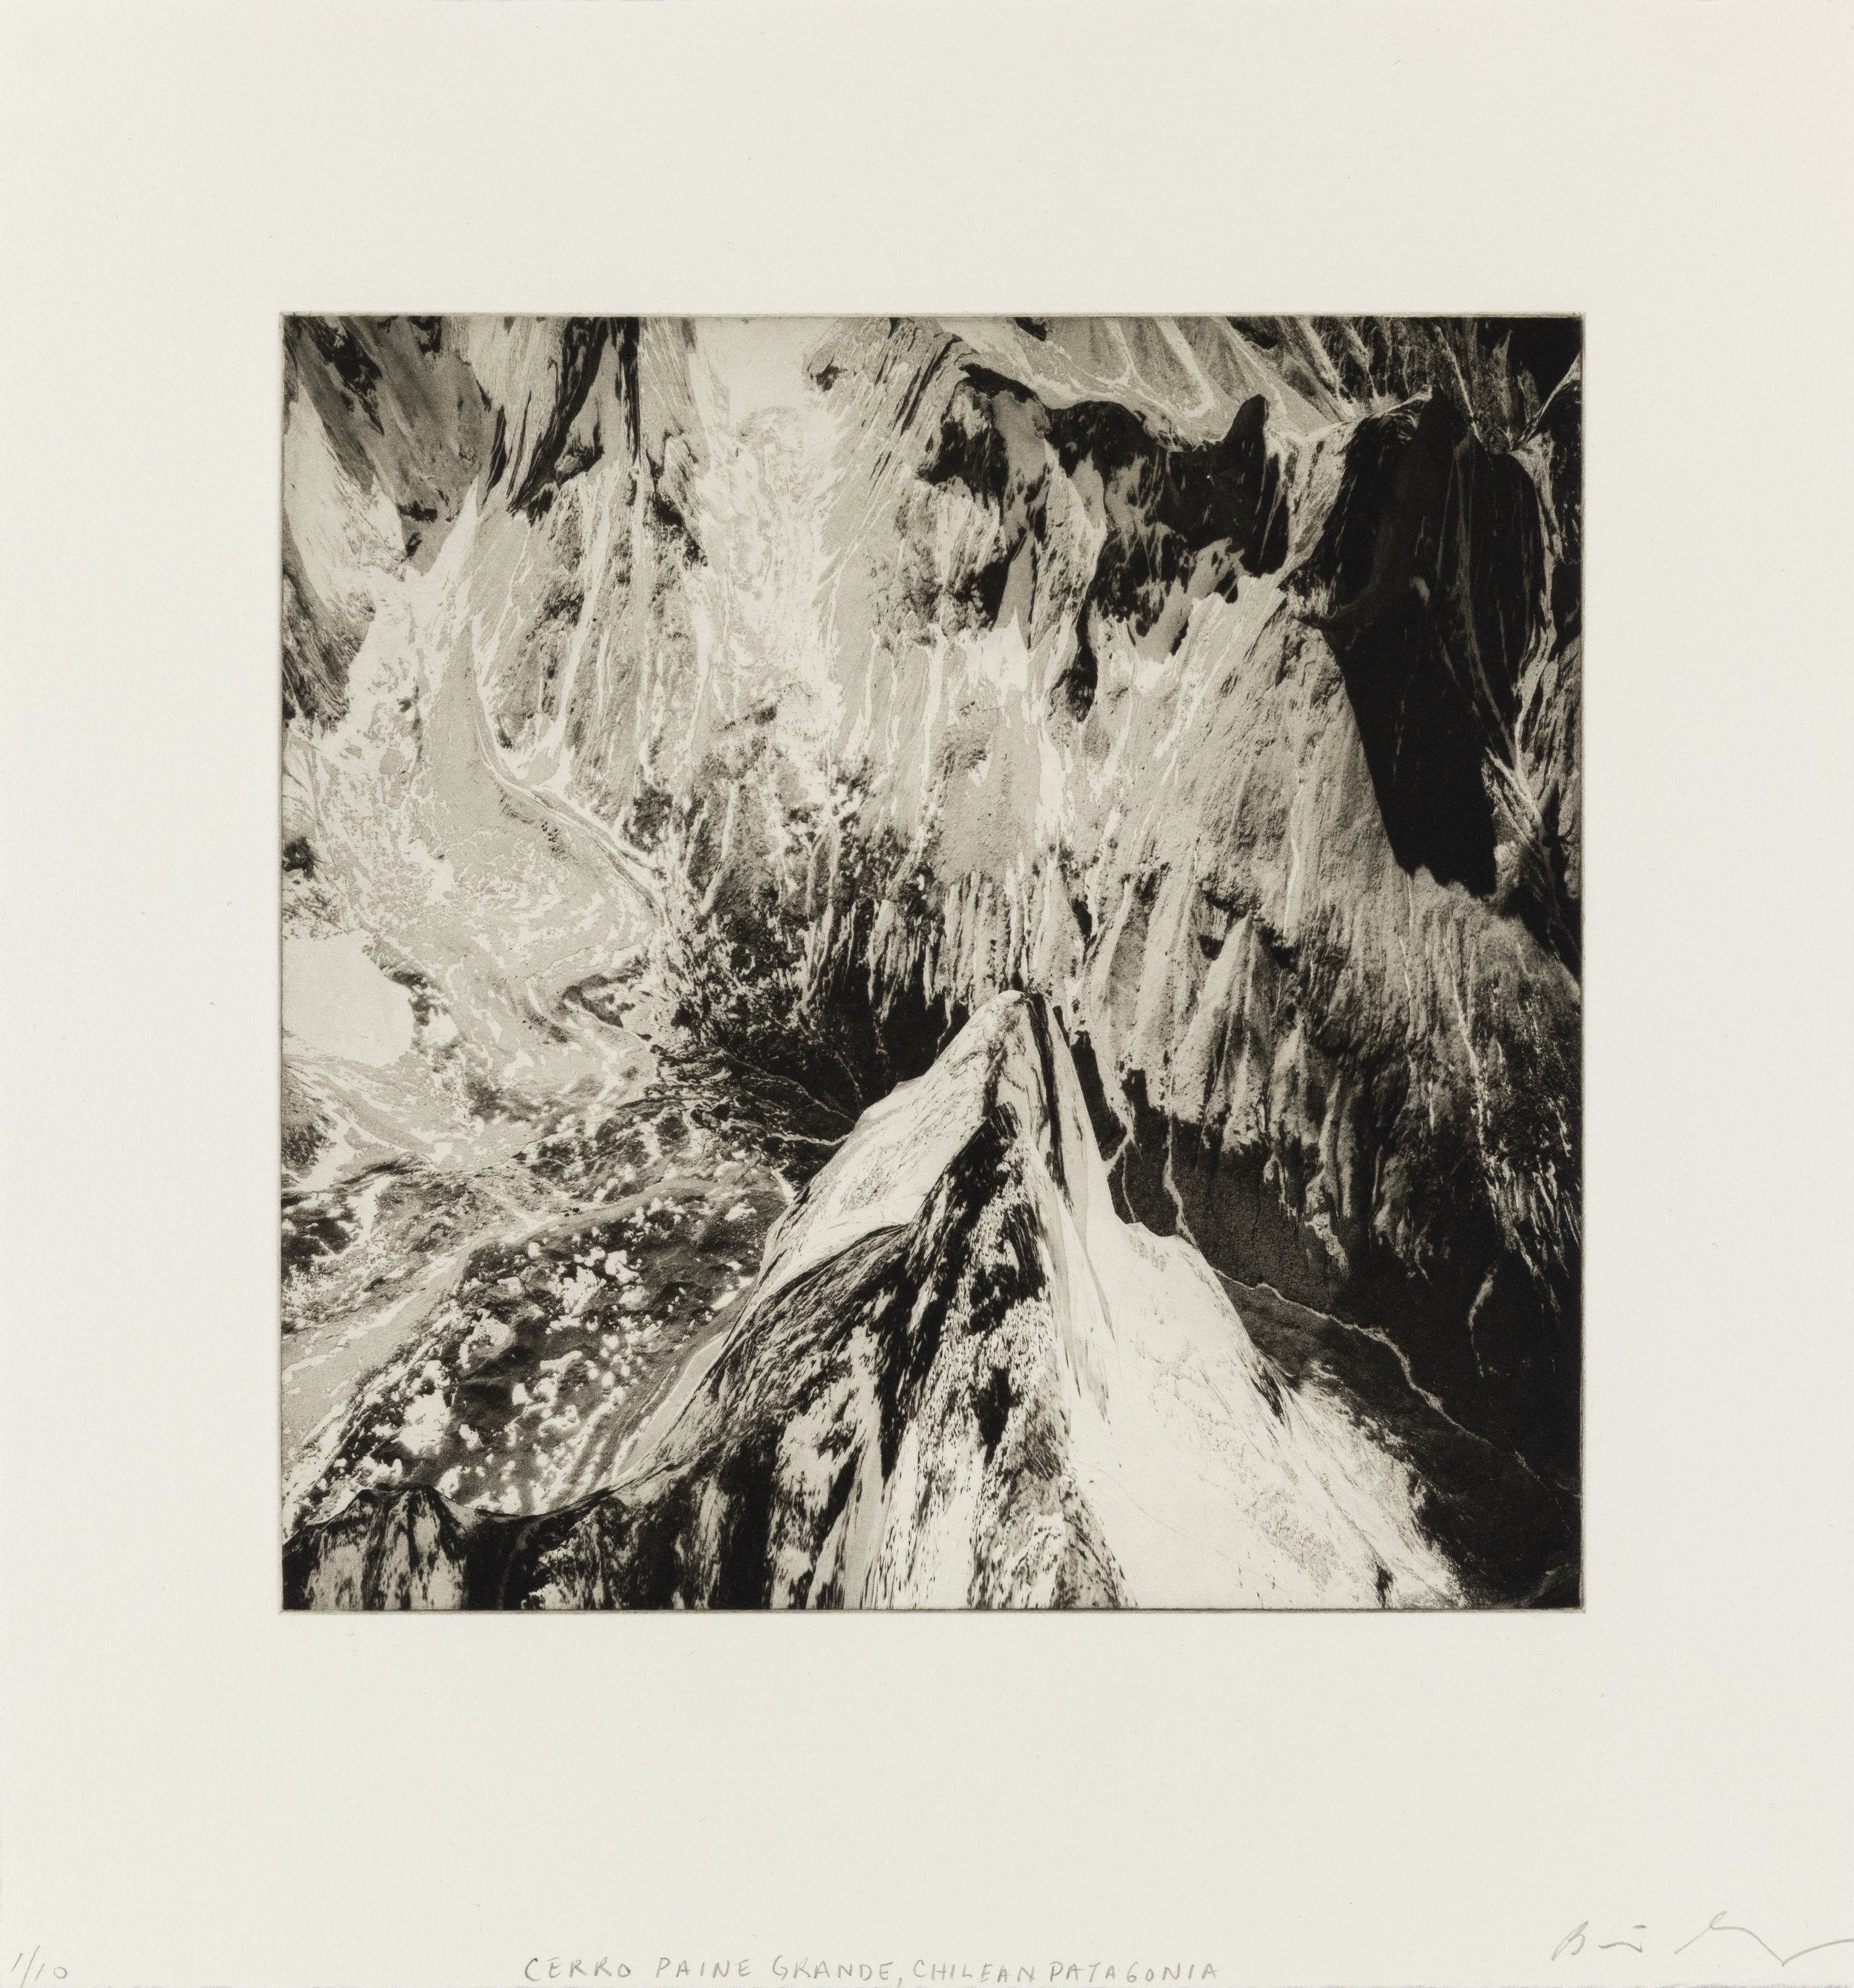    Cerro Paine Grande, Chilean Patagonia, 2021   Copperplate photogravure etching on cotton rag paper, plate size; 10.6 x 10.6, paper size; 16 x 15.5, edition 10  